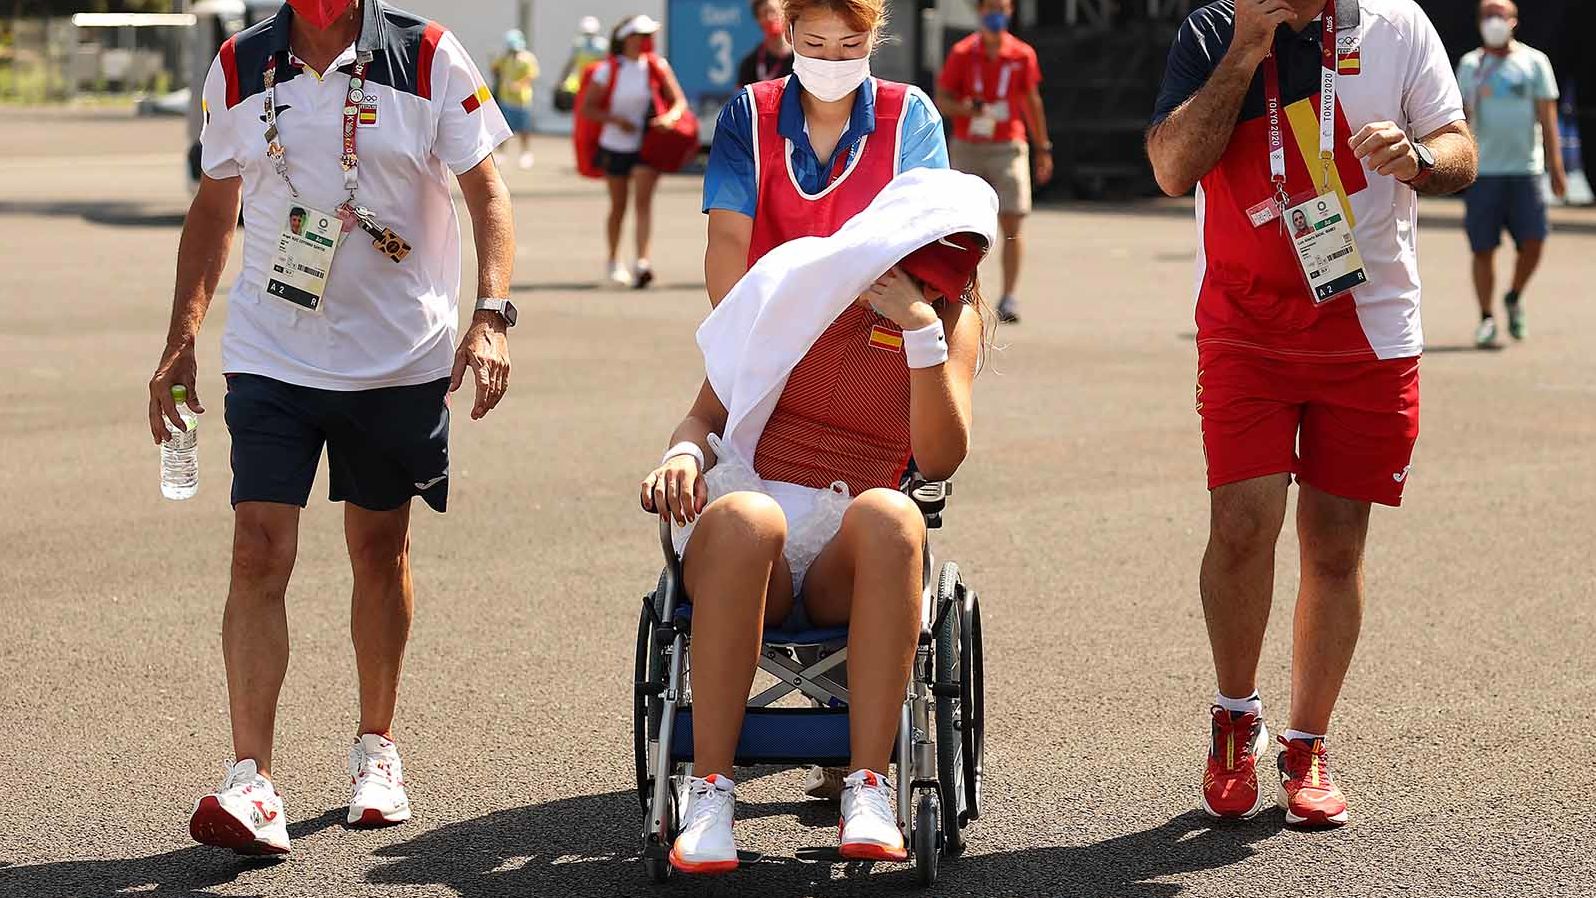 Paula Badosa of Spain is helped away from the court in a wheelchair after having to retire from her quarterfinal match against Marketa Vondrousova.